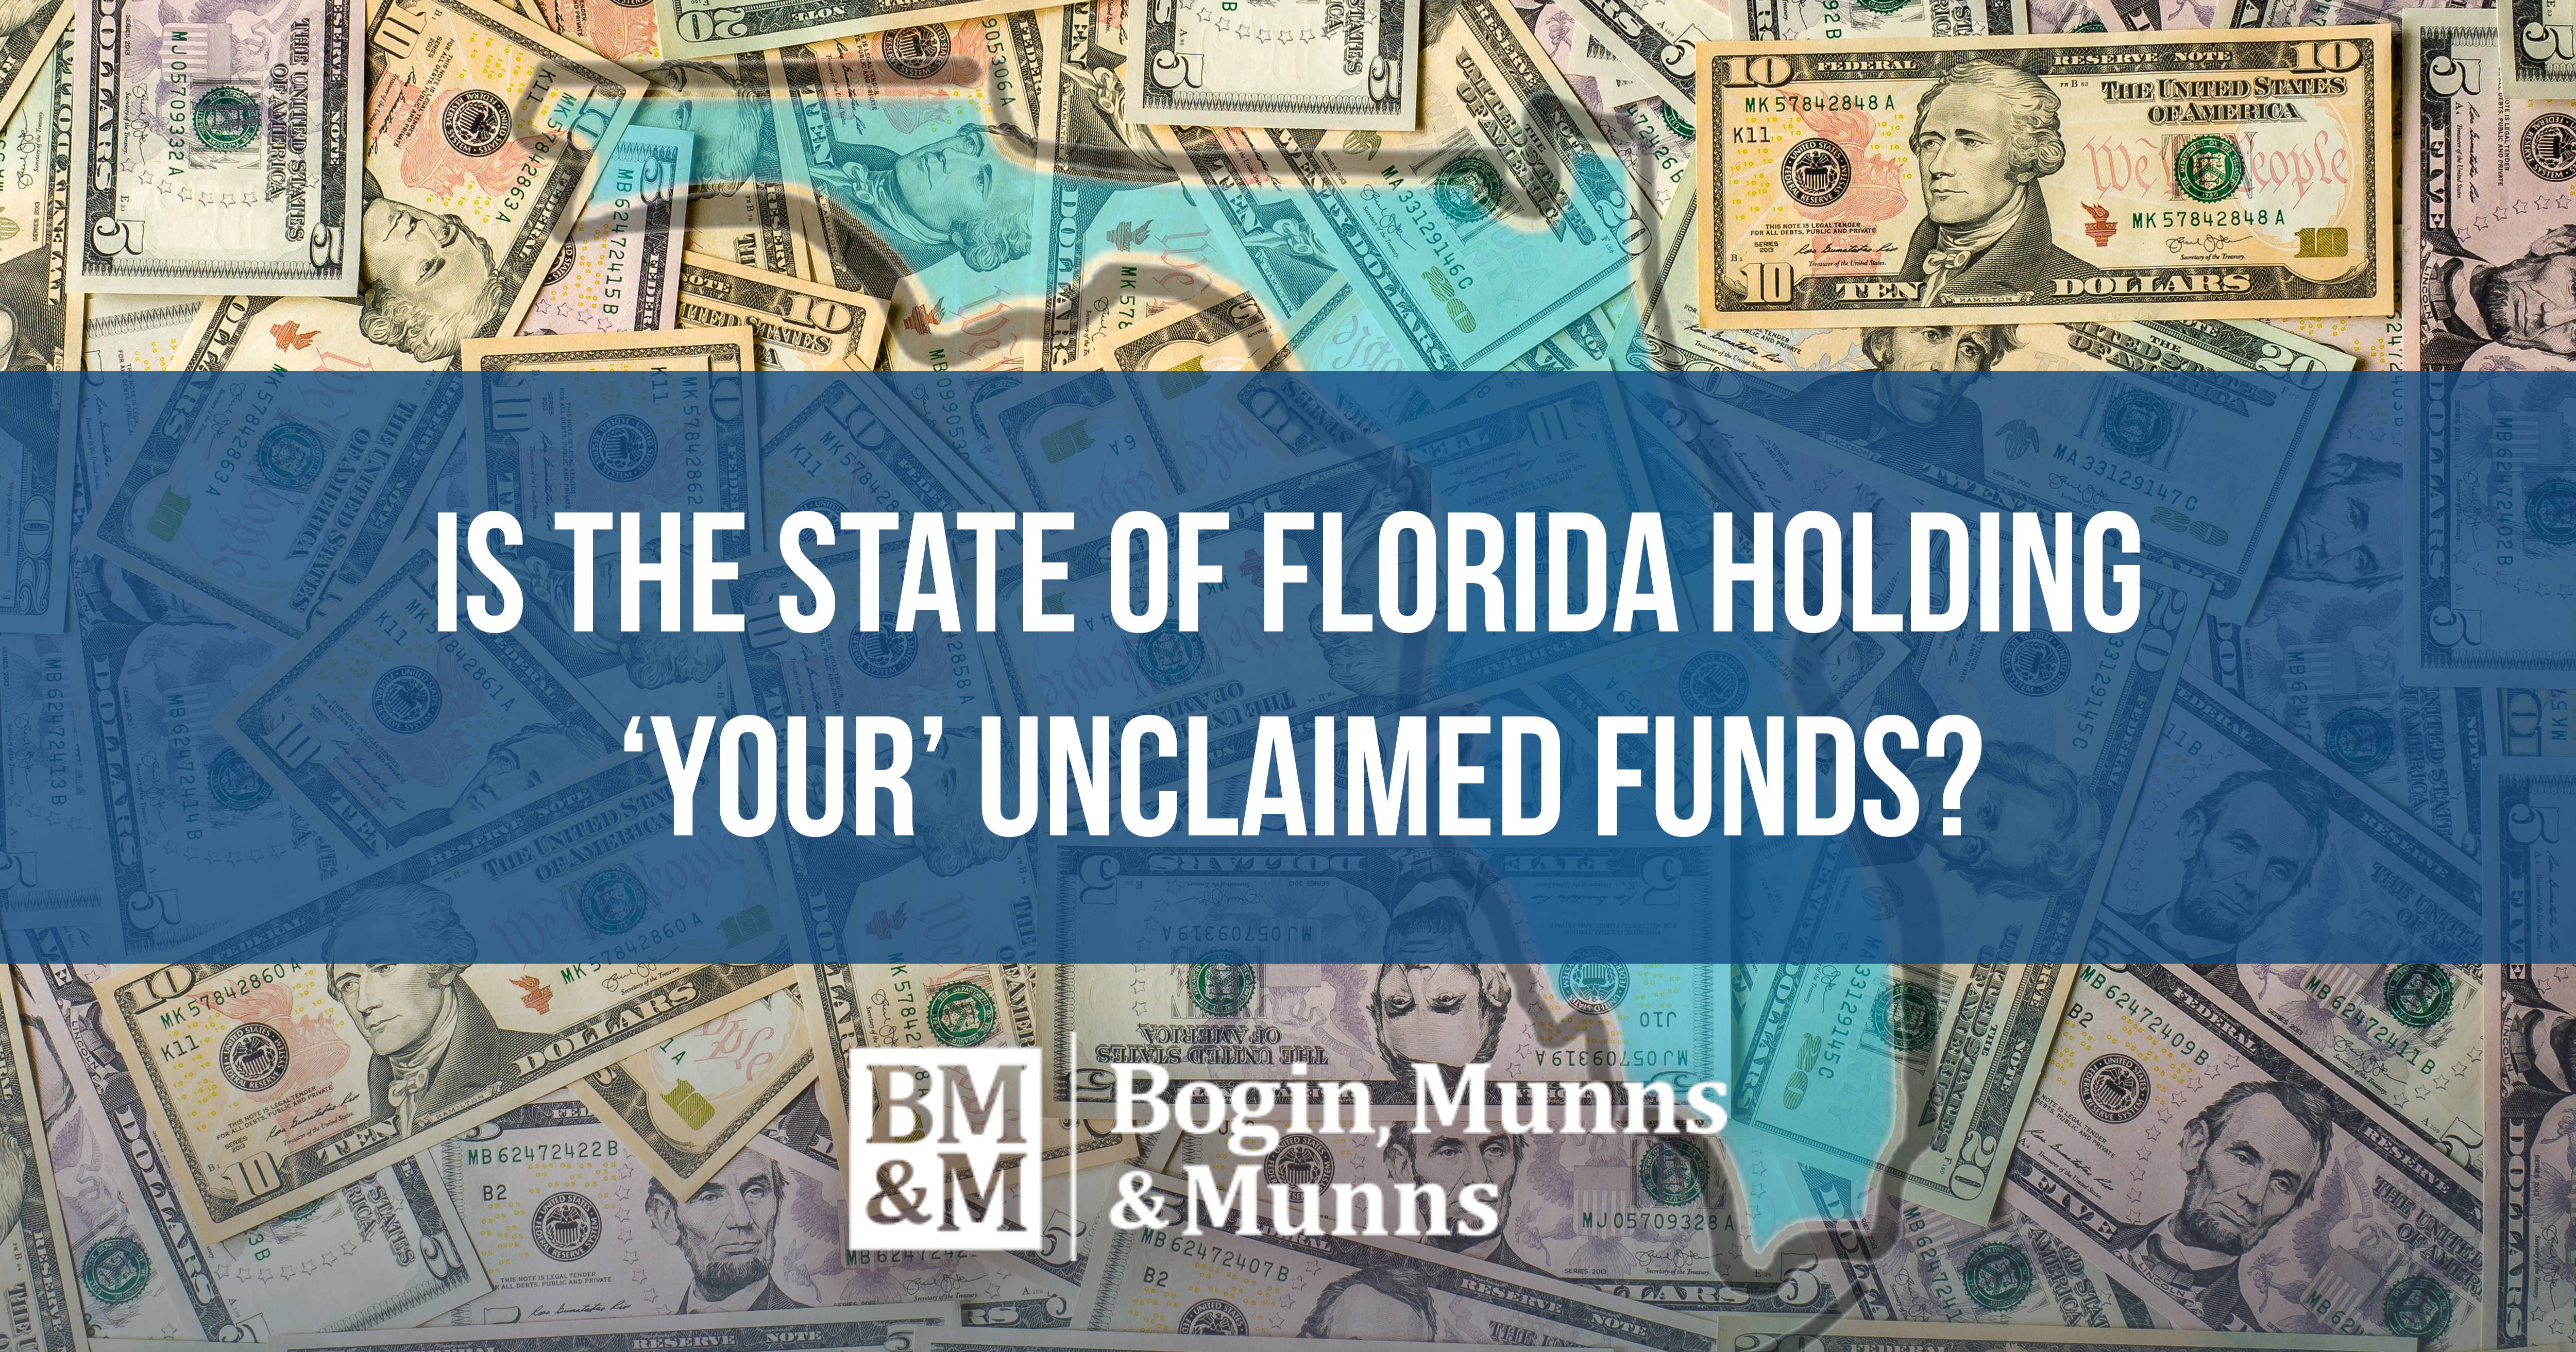 IS THE STATE OF FLORIDA HOLDING ‘YOUR’ UNCLAIMED FUNDS? HERE IS HOW YOU CAN FIND OUT AND MAKE A REIMBURSEMENT CLAIM.